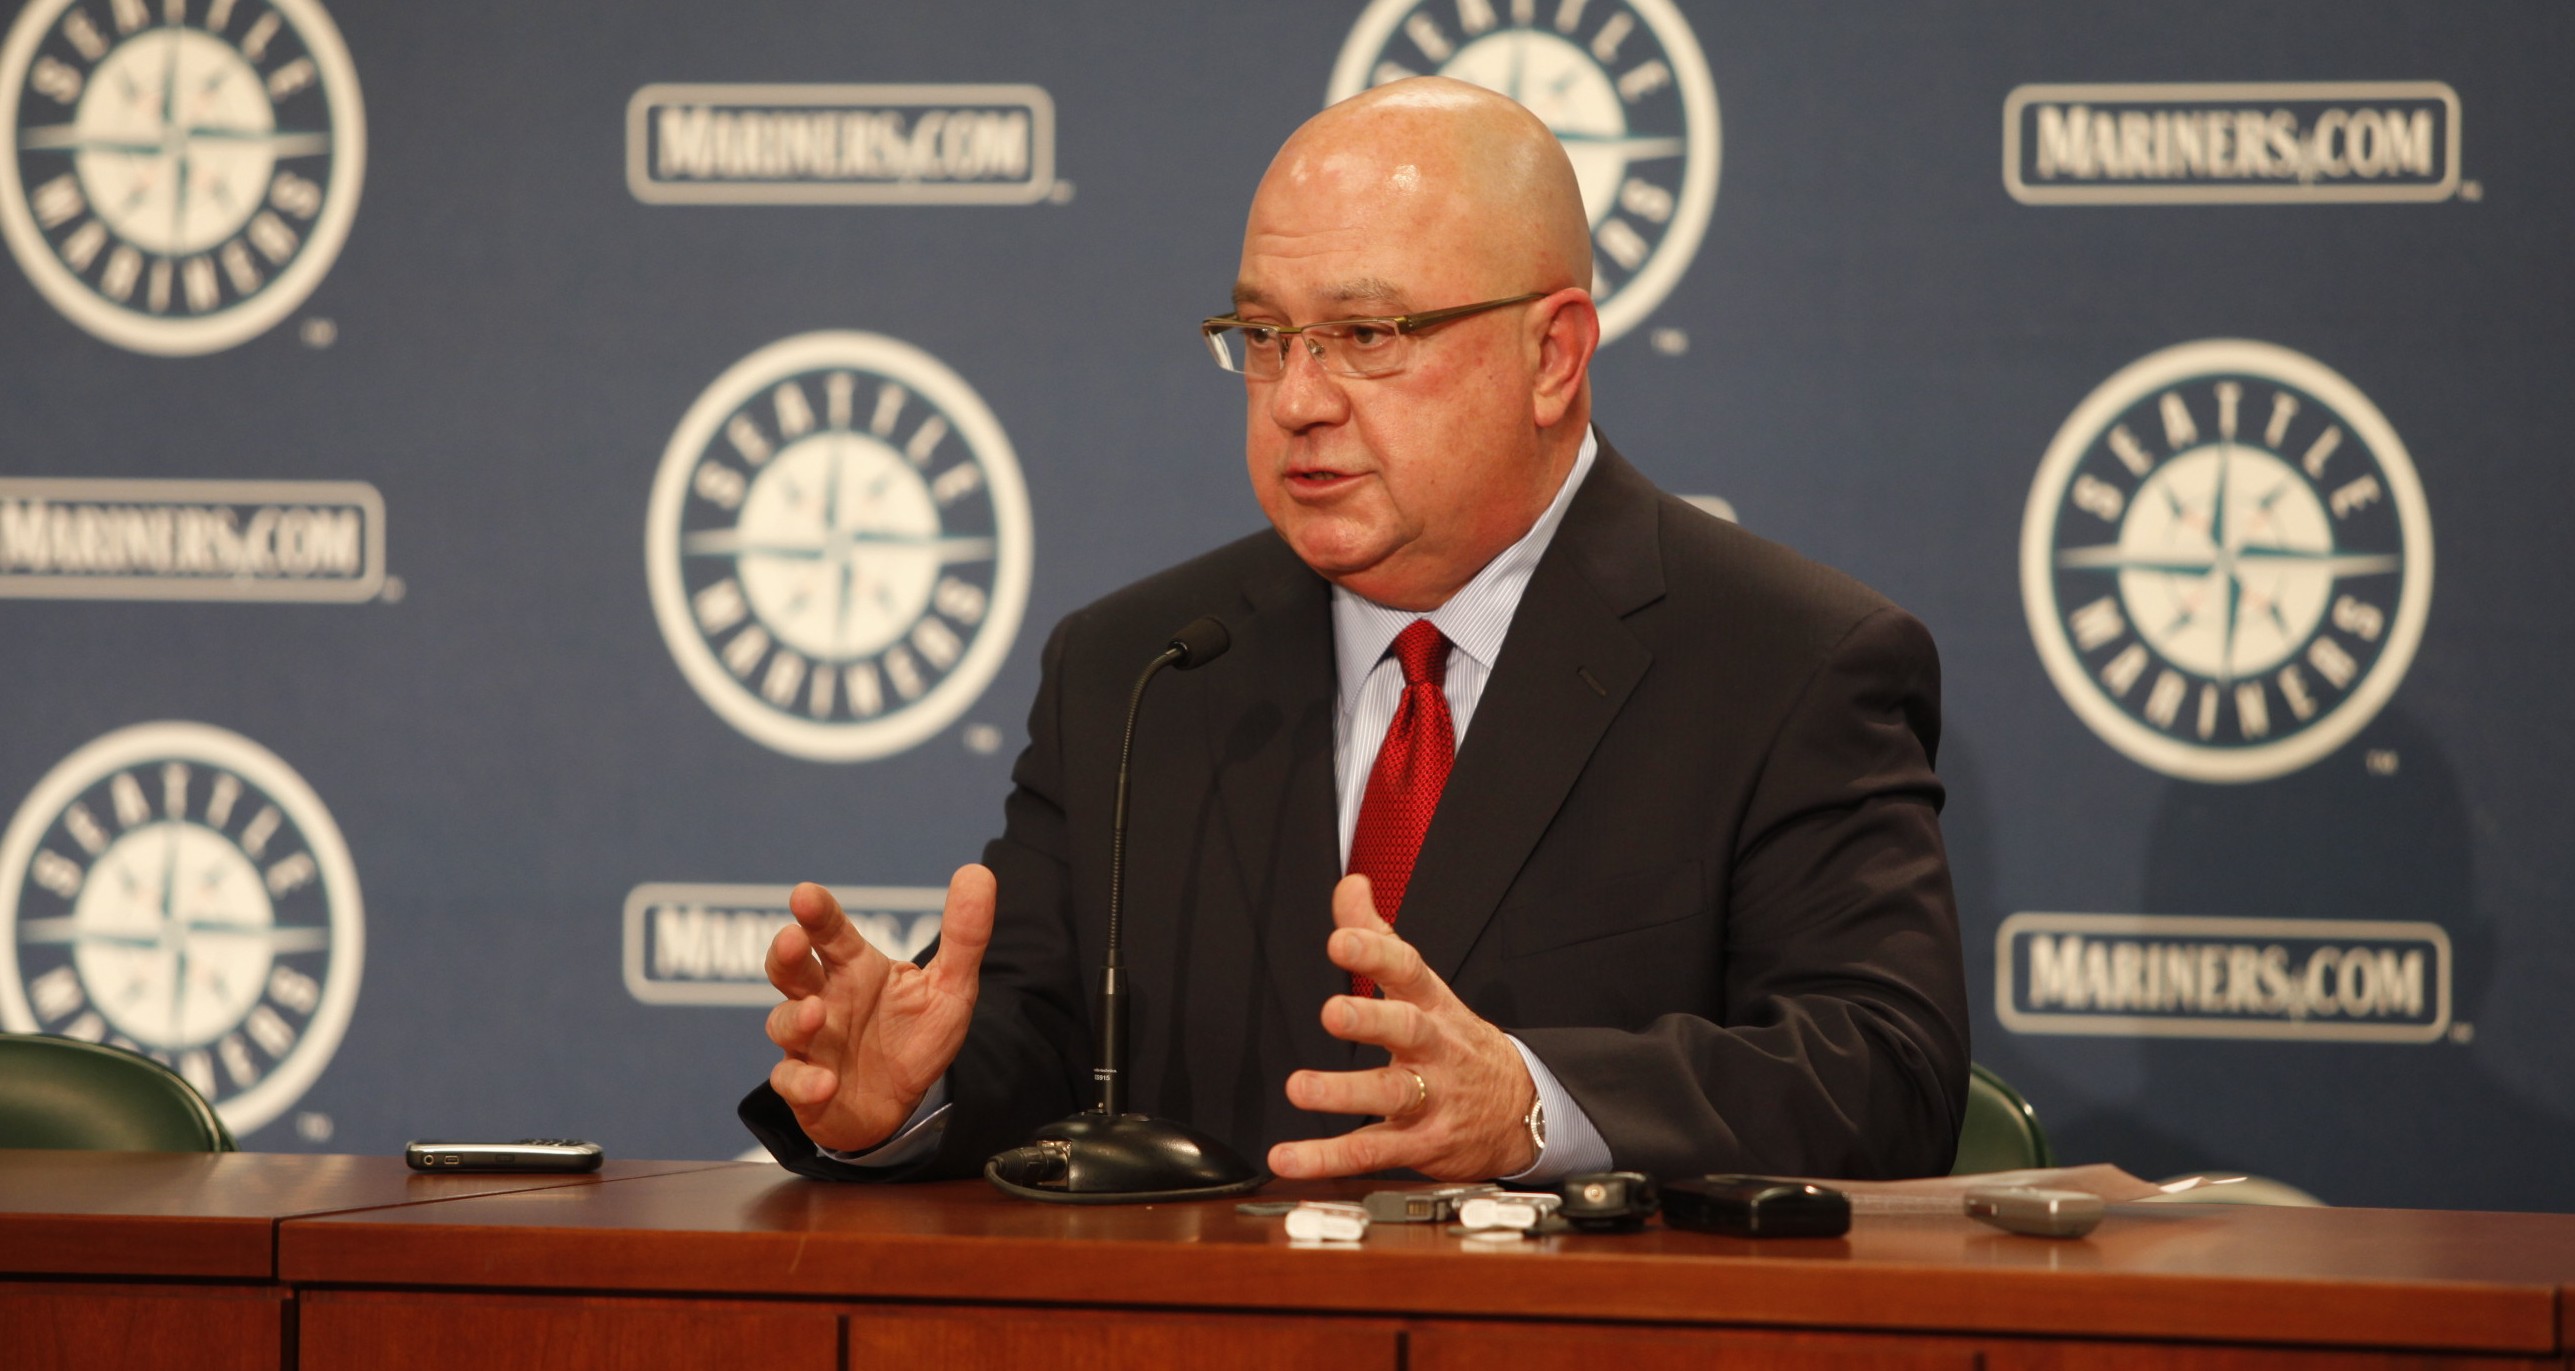 Seattle Mariners General Manager Jack Zduriencik has built a roster that has the team in late-season contention for a playoff berth for the first time in 10 years.